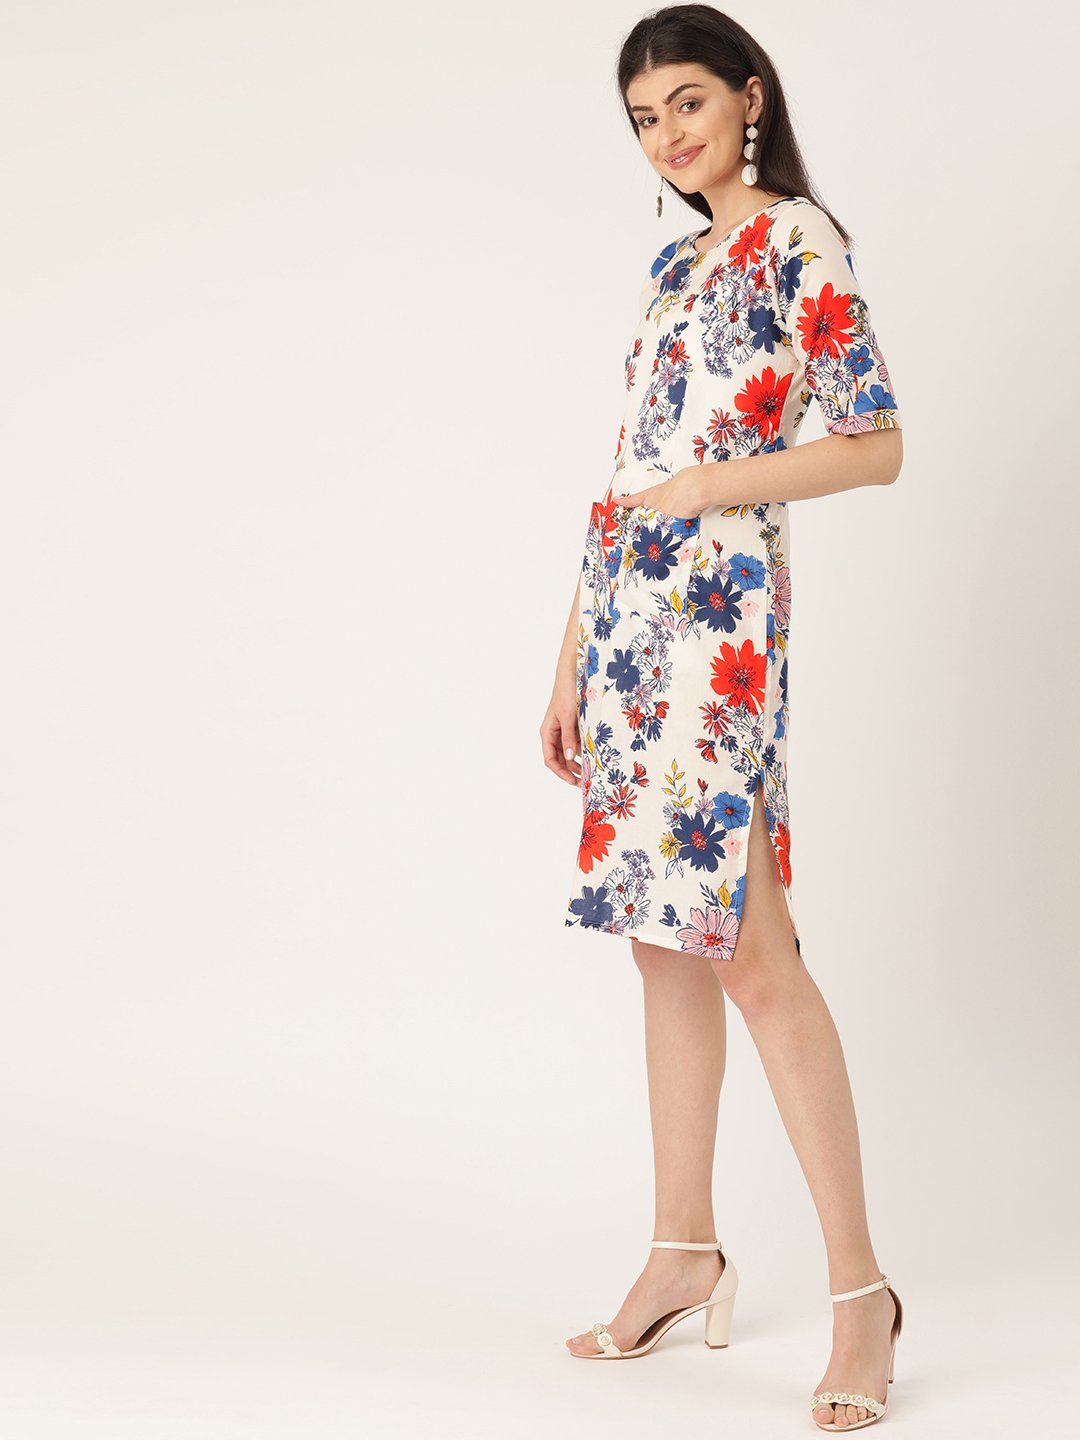 Floral Printed Dress With Pockets